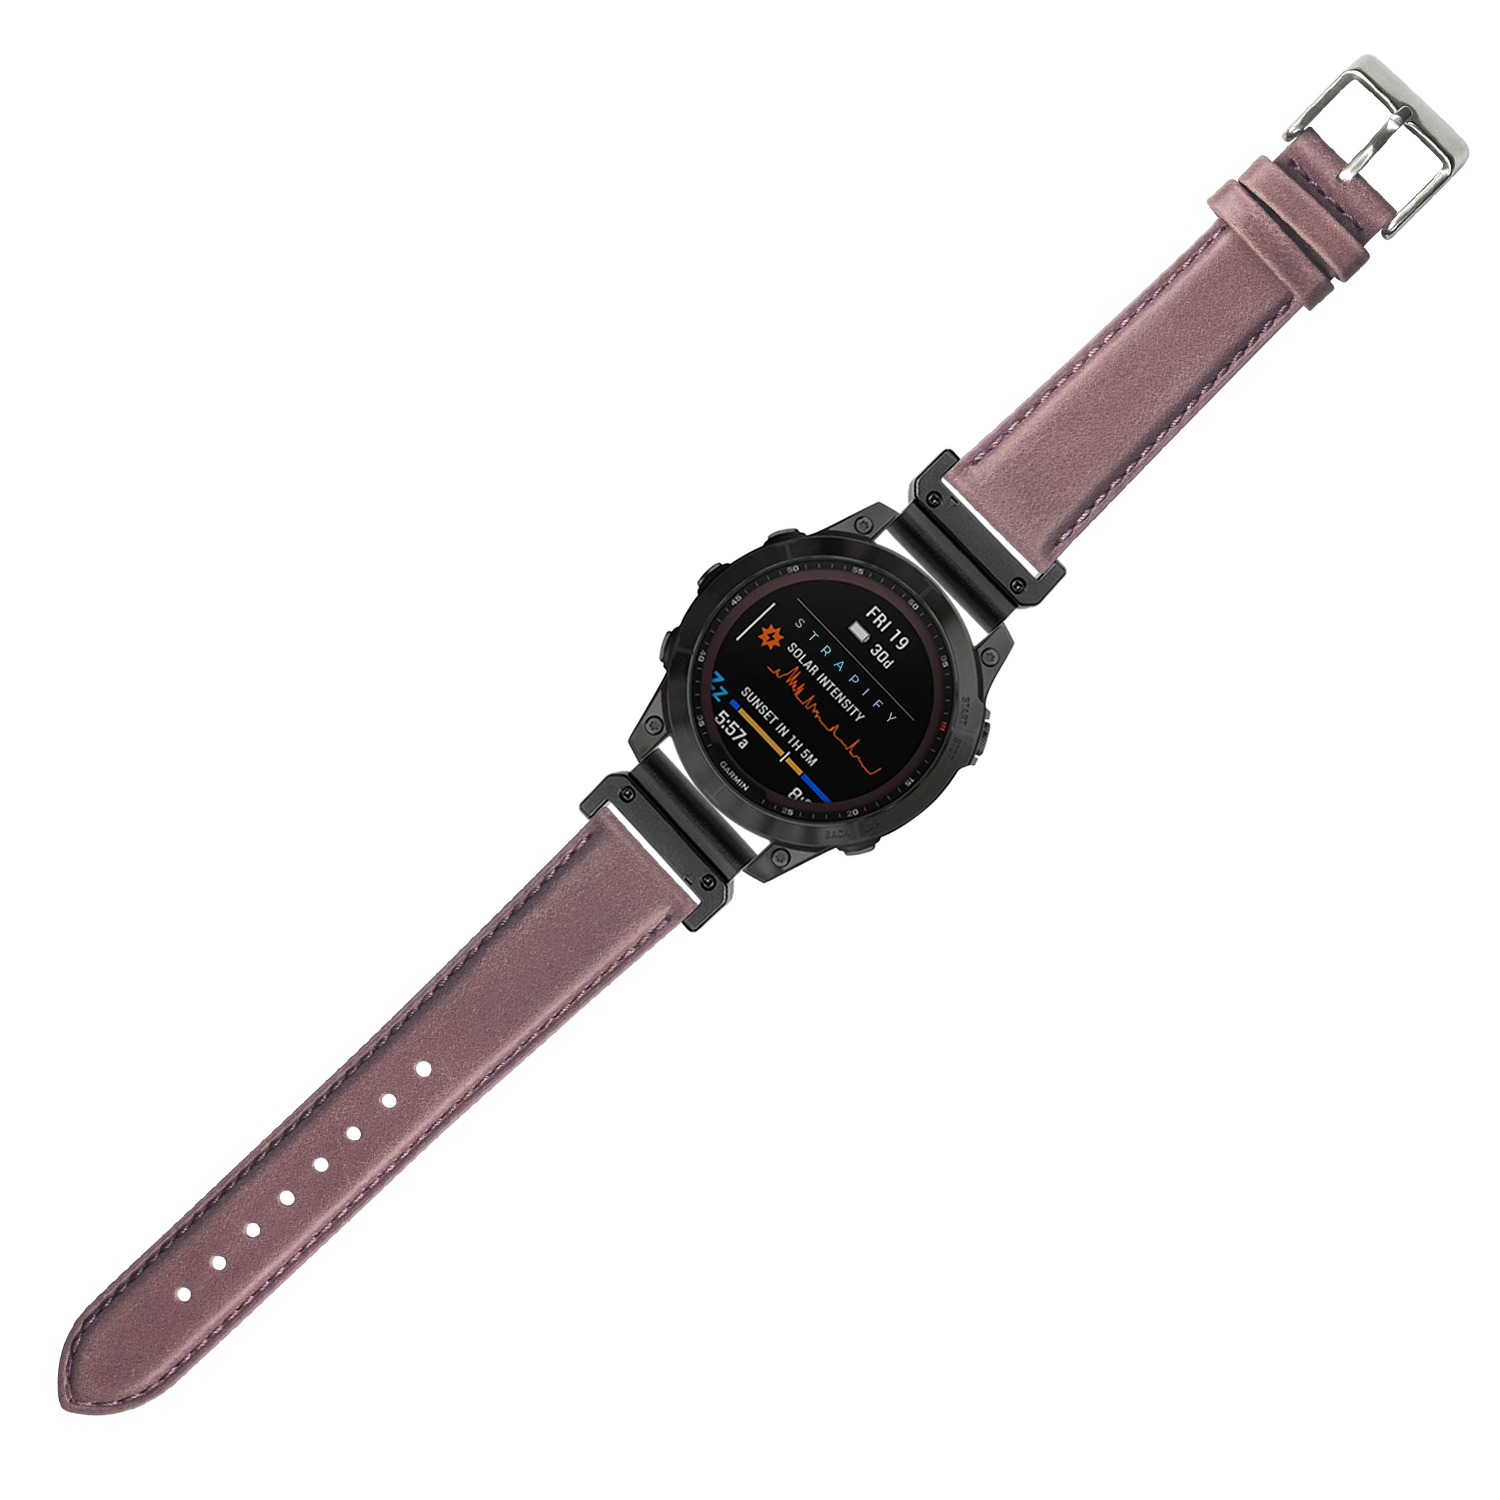 [QuickFit] Padded Leather - Mauve 26mm